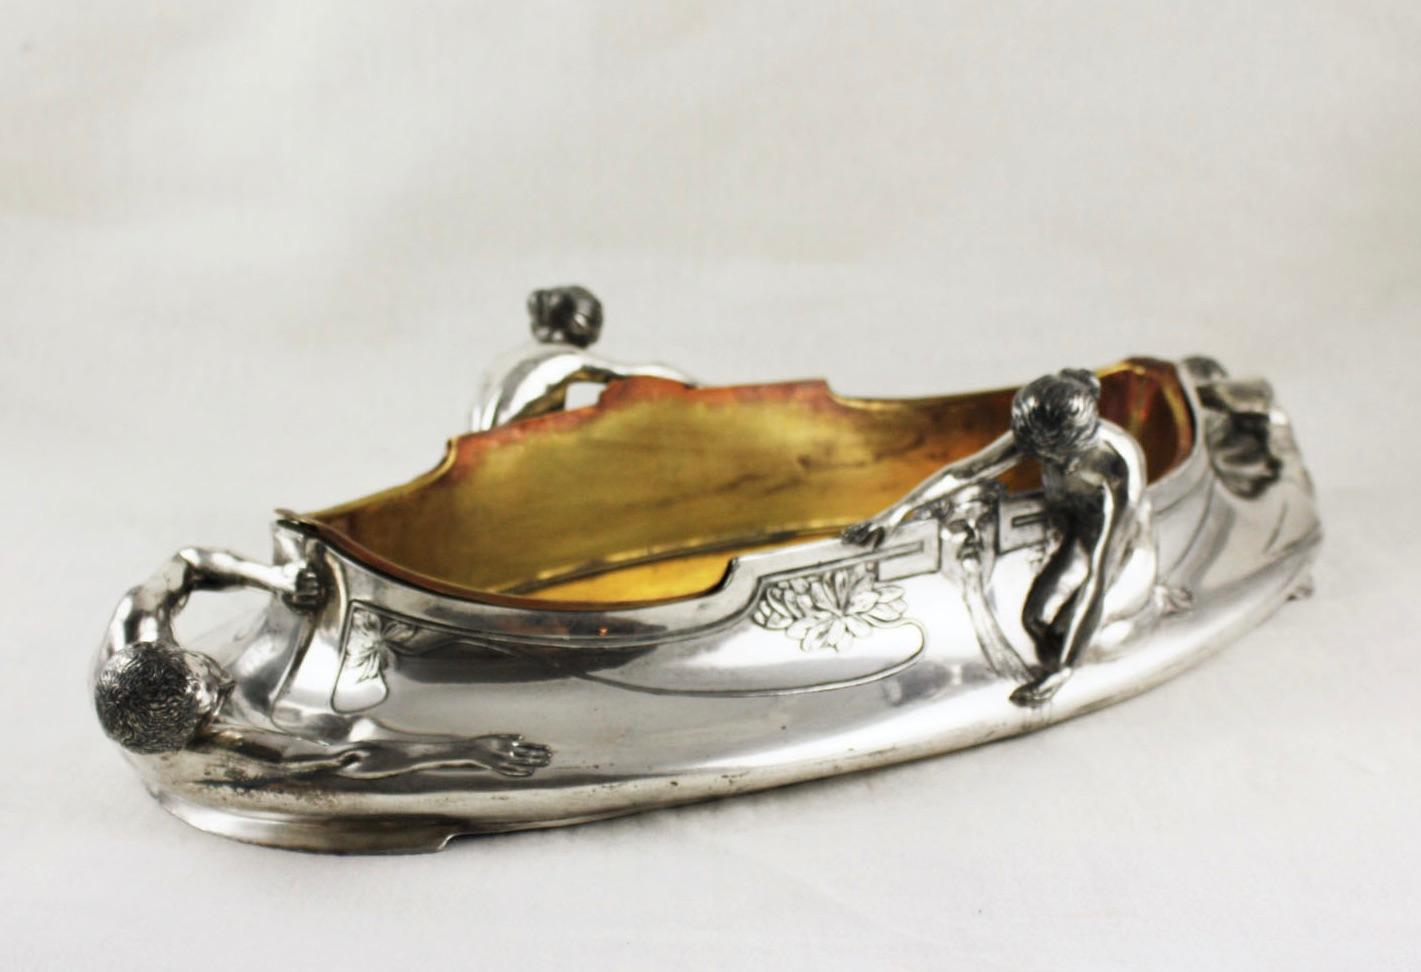 Extraordinary Art Nouveau bowl, very decorative, floral design. Outer element silver plated, inside made of tin. High quality.